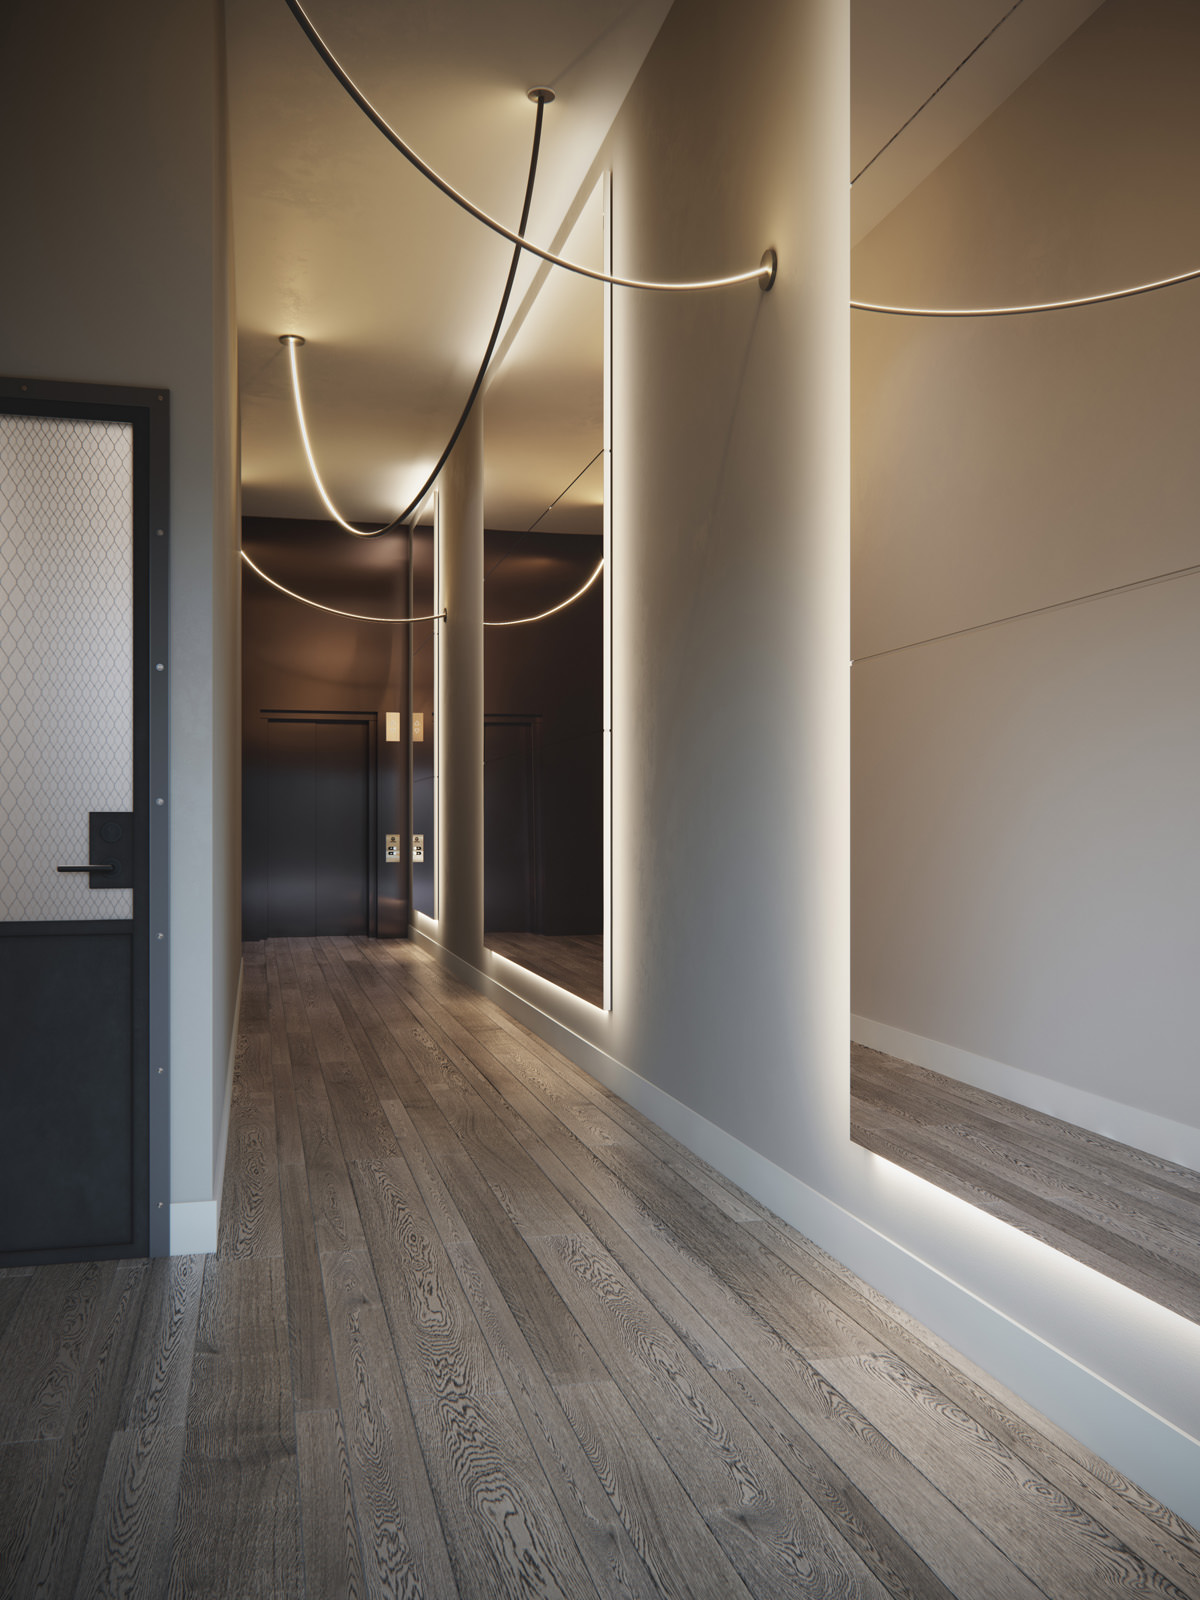 3D rendering of a corridor of boutique office with the main focus on multiple string lights fixed on the white ceiling and walls with several backlit floor-to-ceiling mirrors, SoHo, New York City, USA